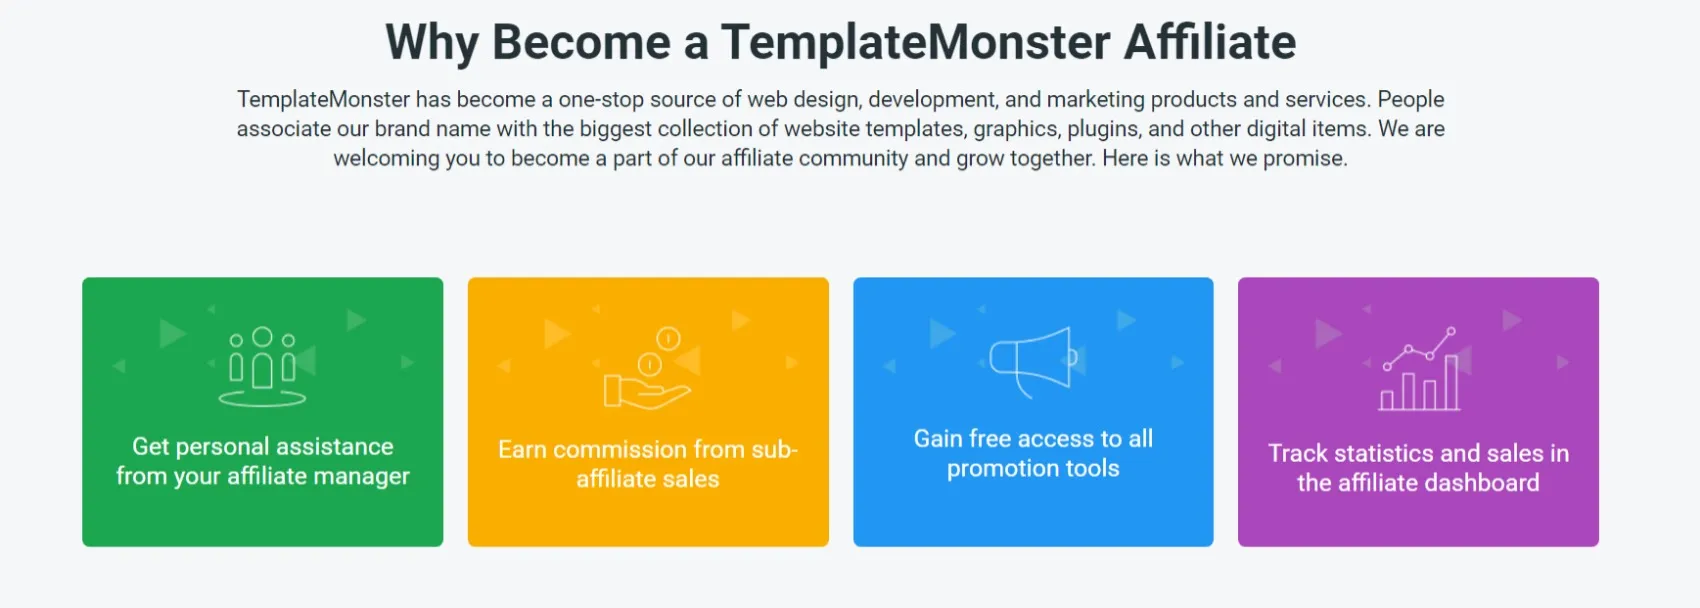 Why Become a TemplateMonster Affiliate